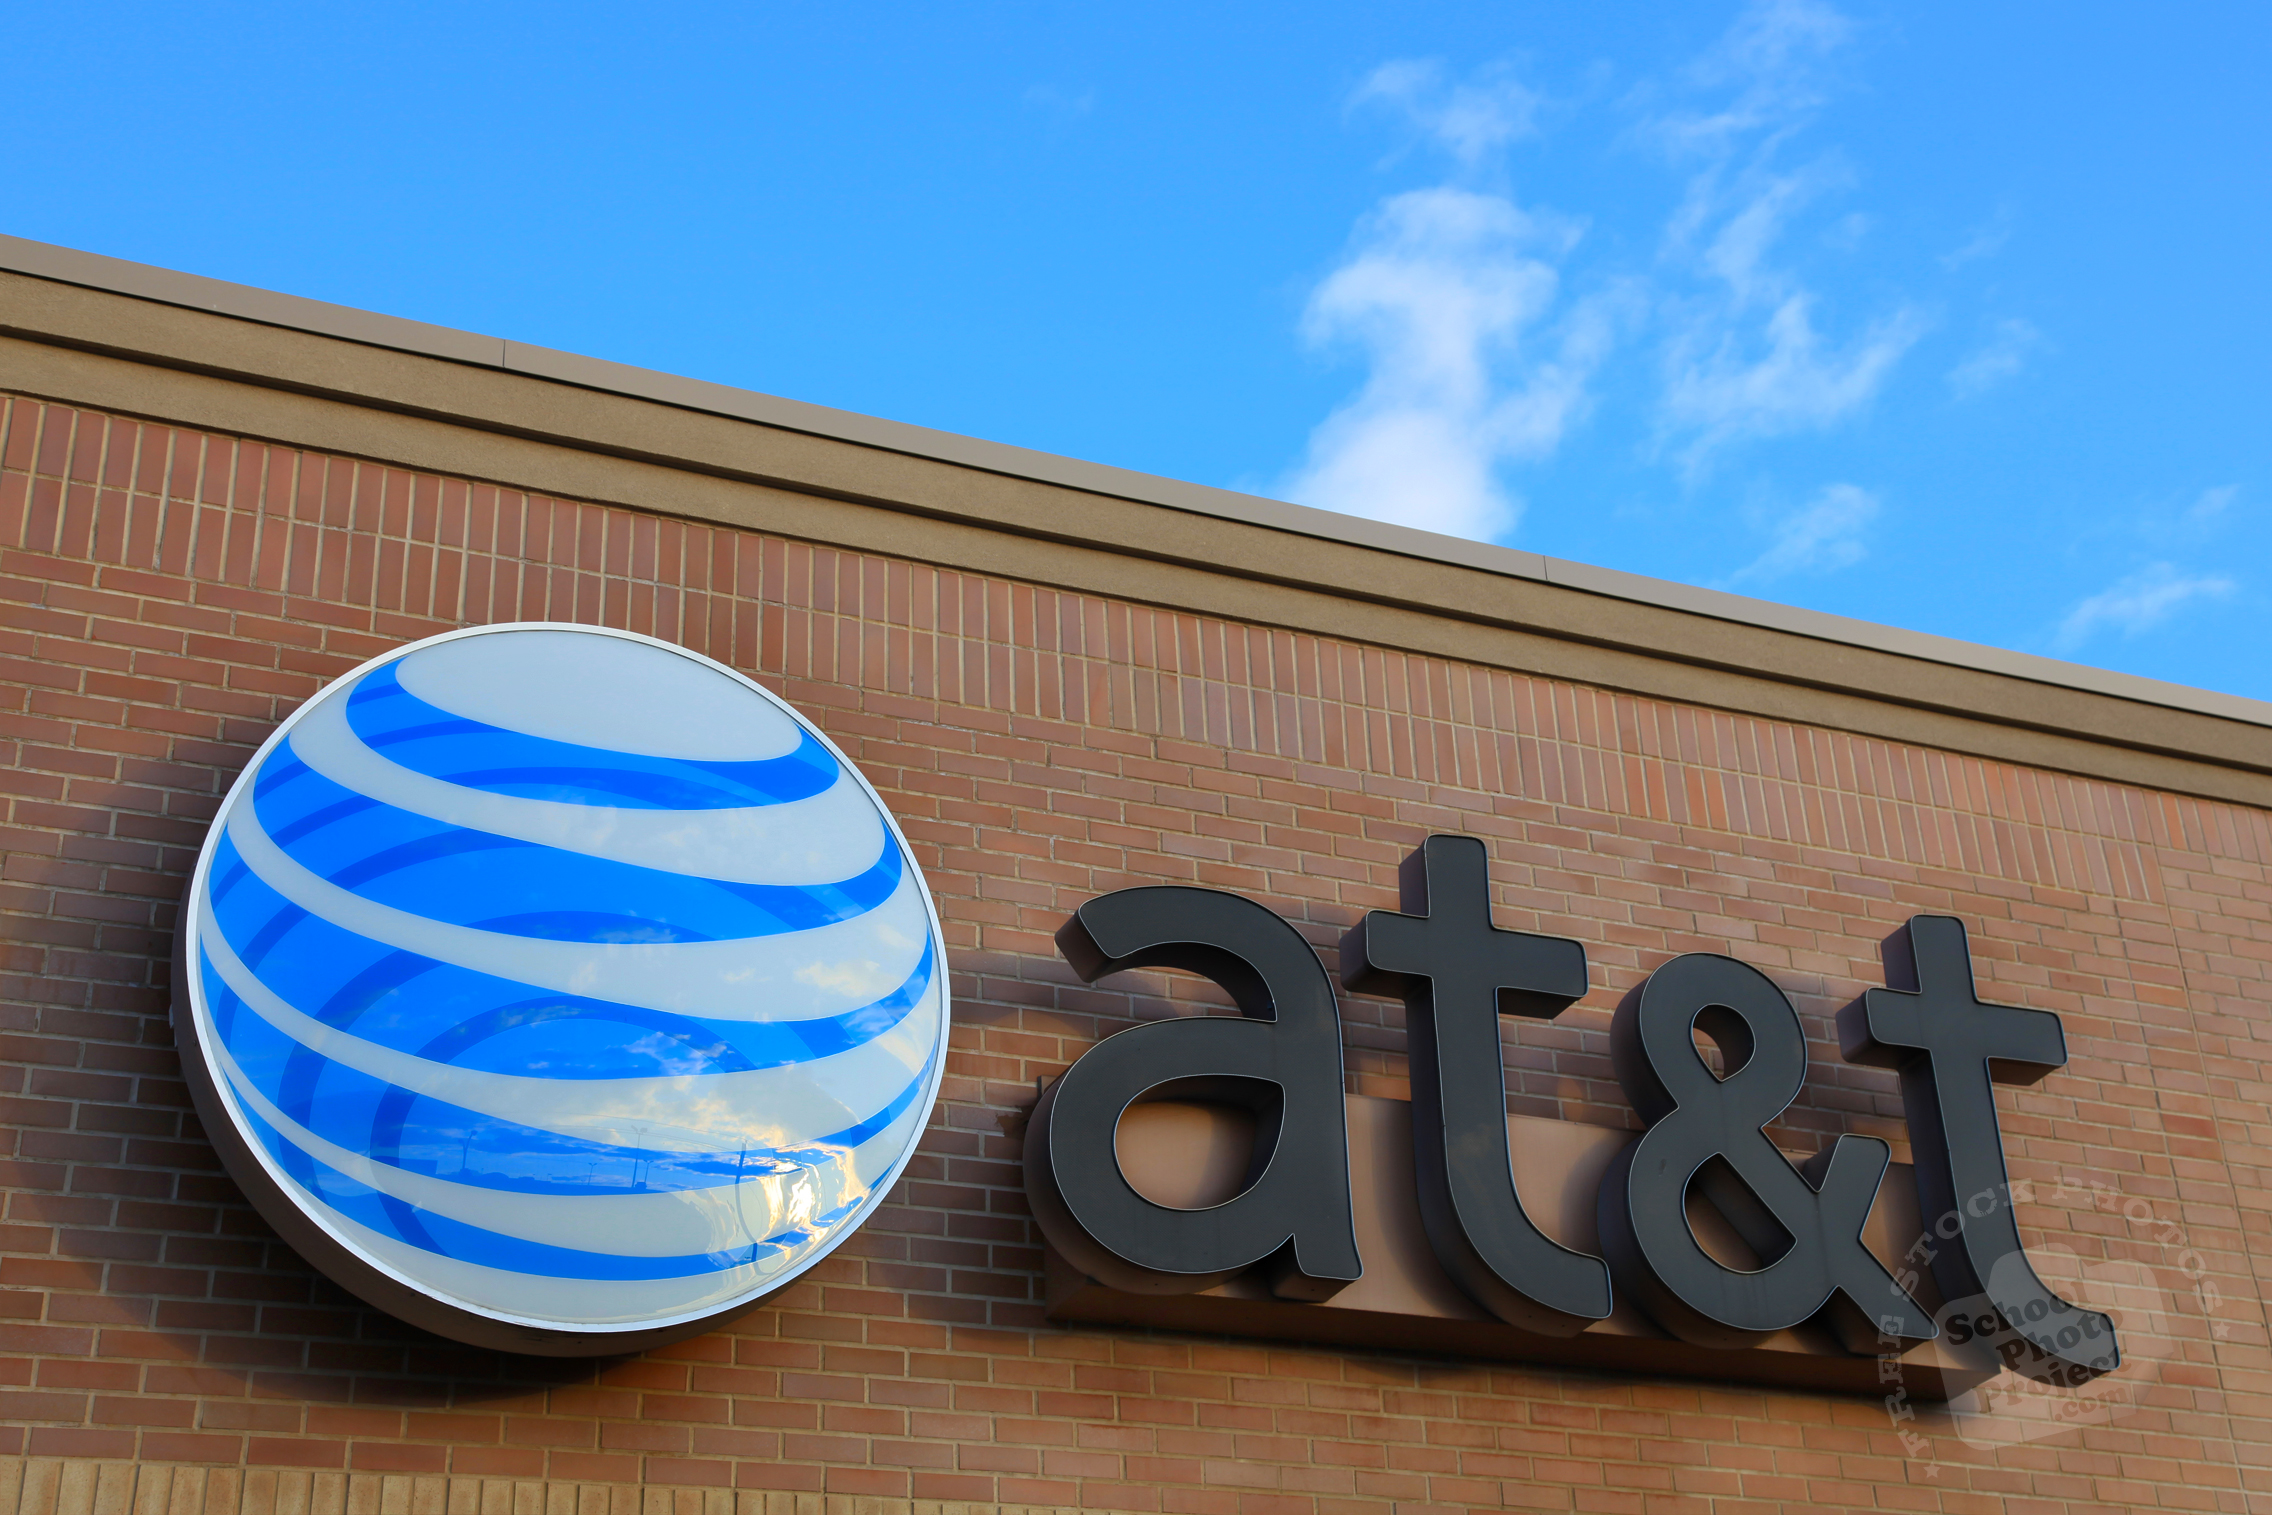 FREE AT&T Logo, AT&T Identity, Popular Company's Brand Images, Royalty